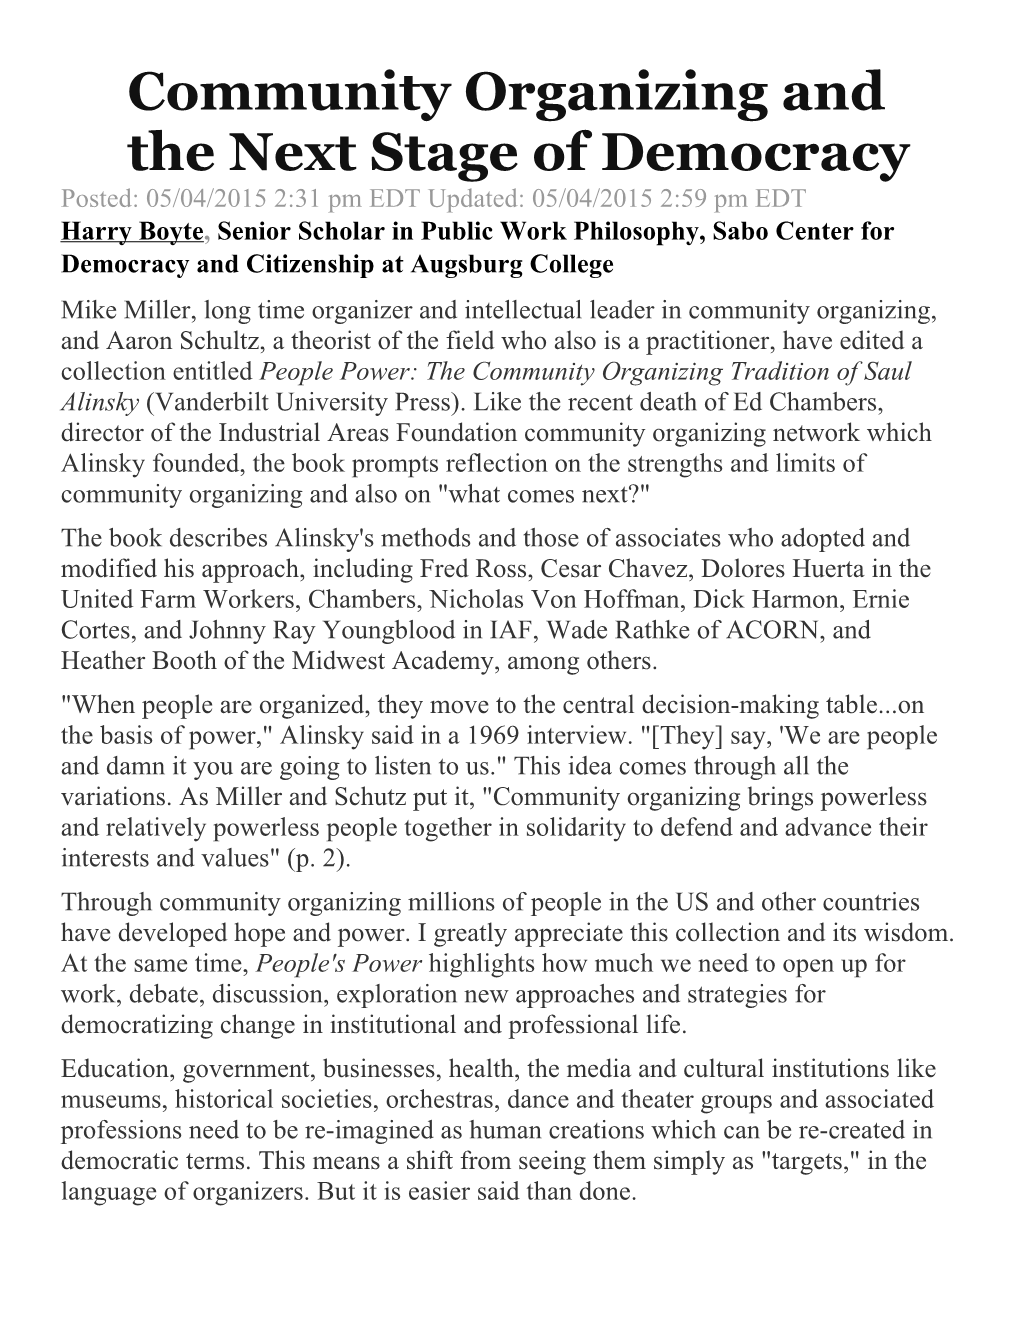 Community Organizing and the Next Stage of Democracy